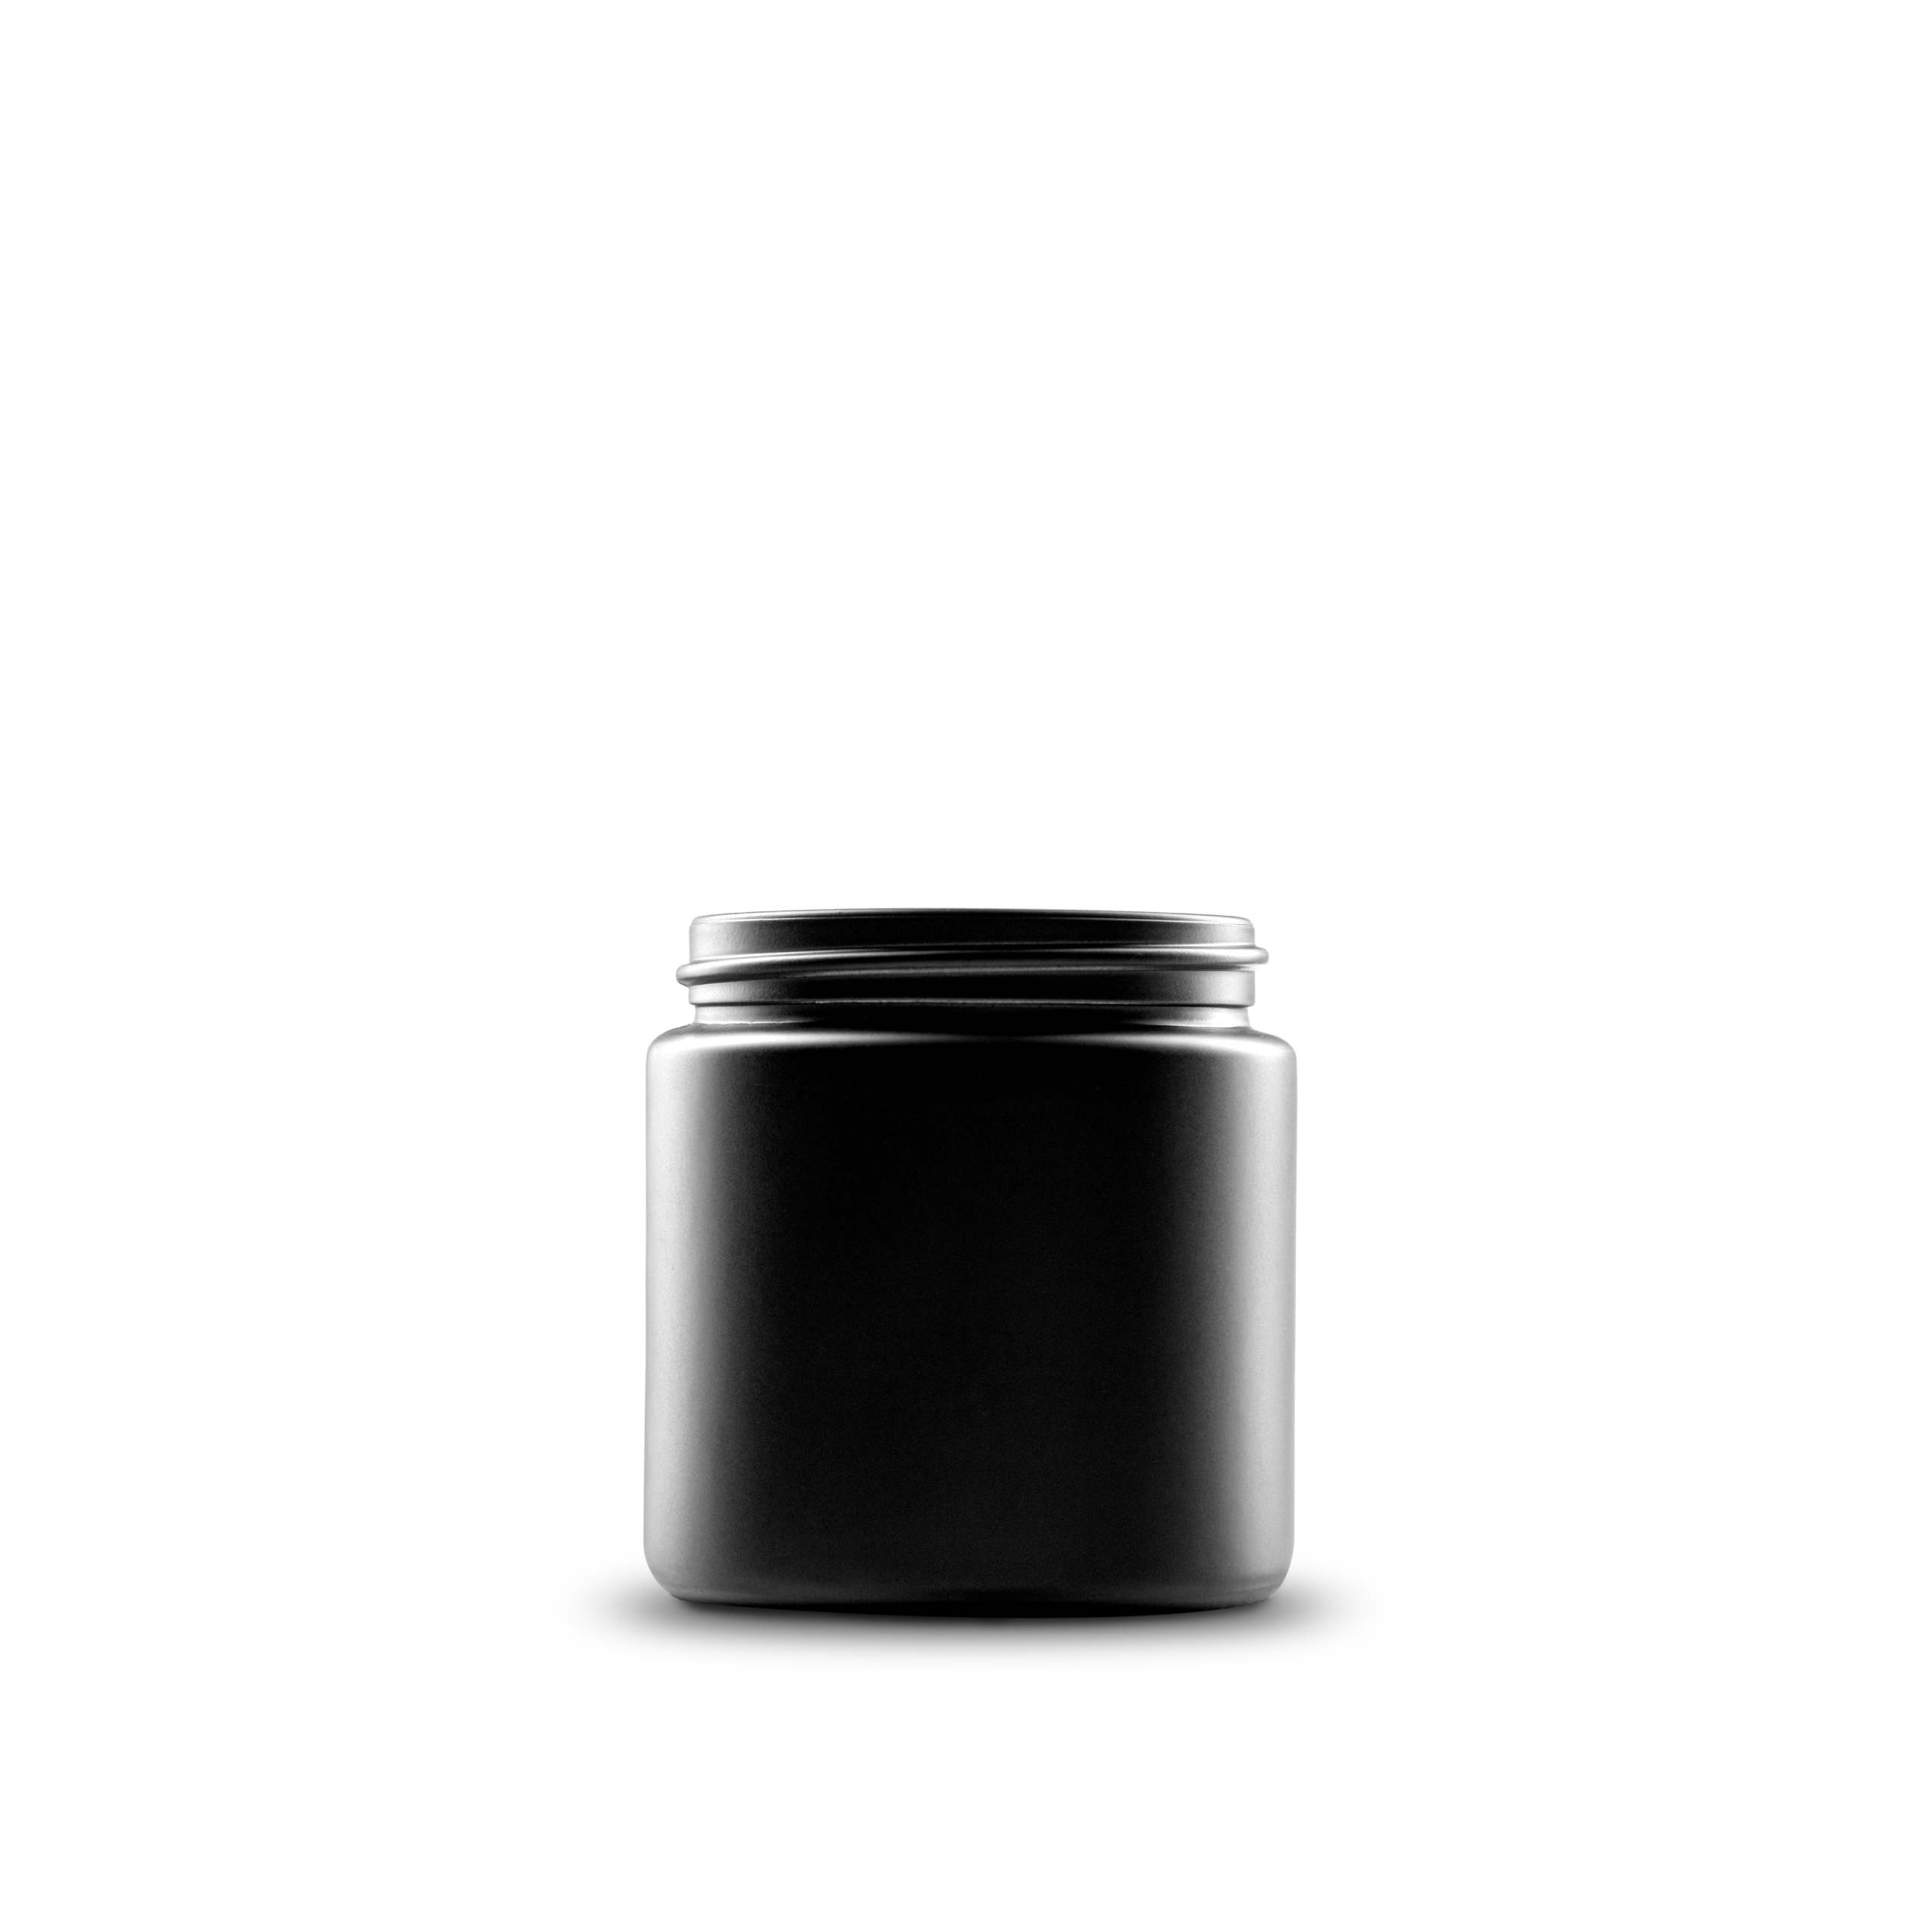 4 oz Black Frosted Glass Straight-Sided Round Jar 58-400 Neck Finish